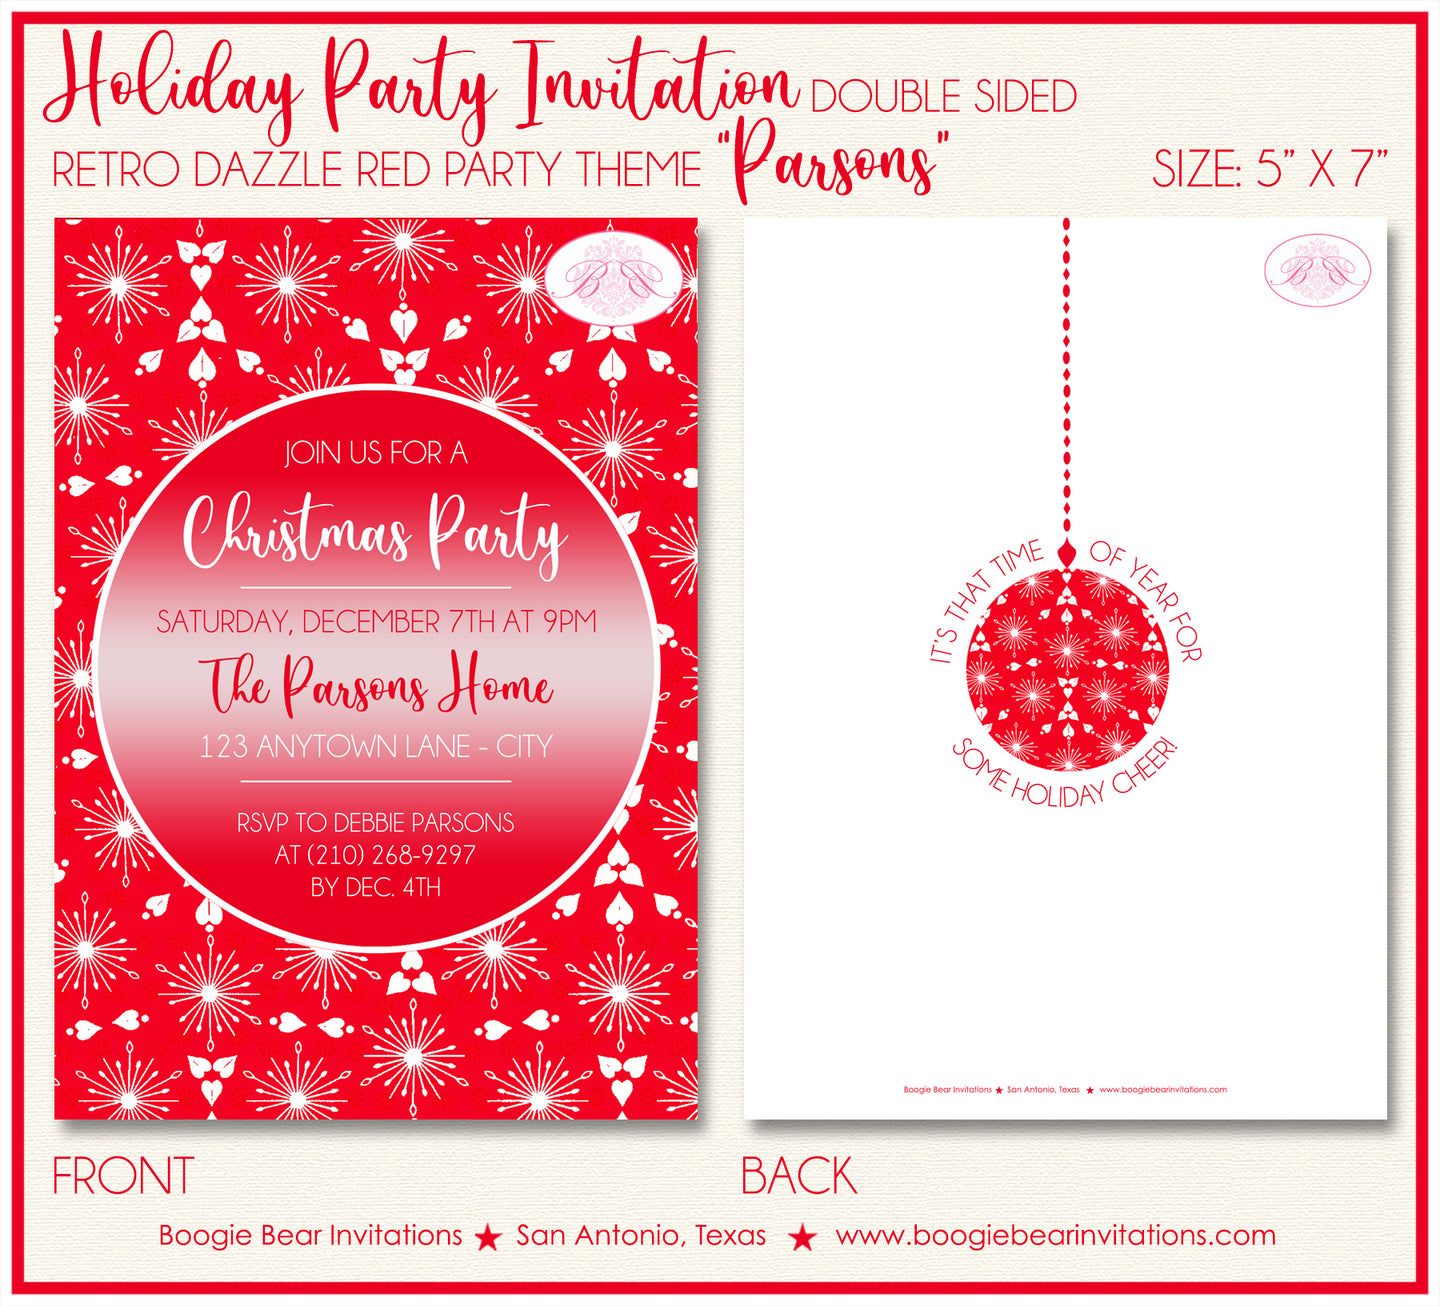 Retro Red Winter Holiday Party Invitation Ornament Dazzle Star Christmas Boogie Bear Invitations Parsons Theme Paperless Printable Printed